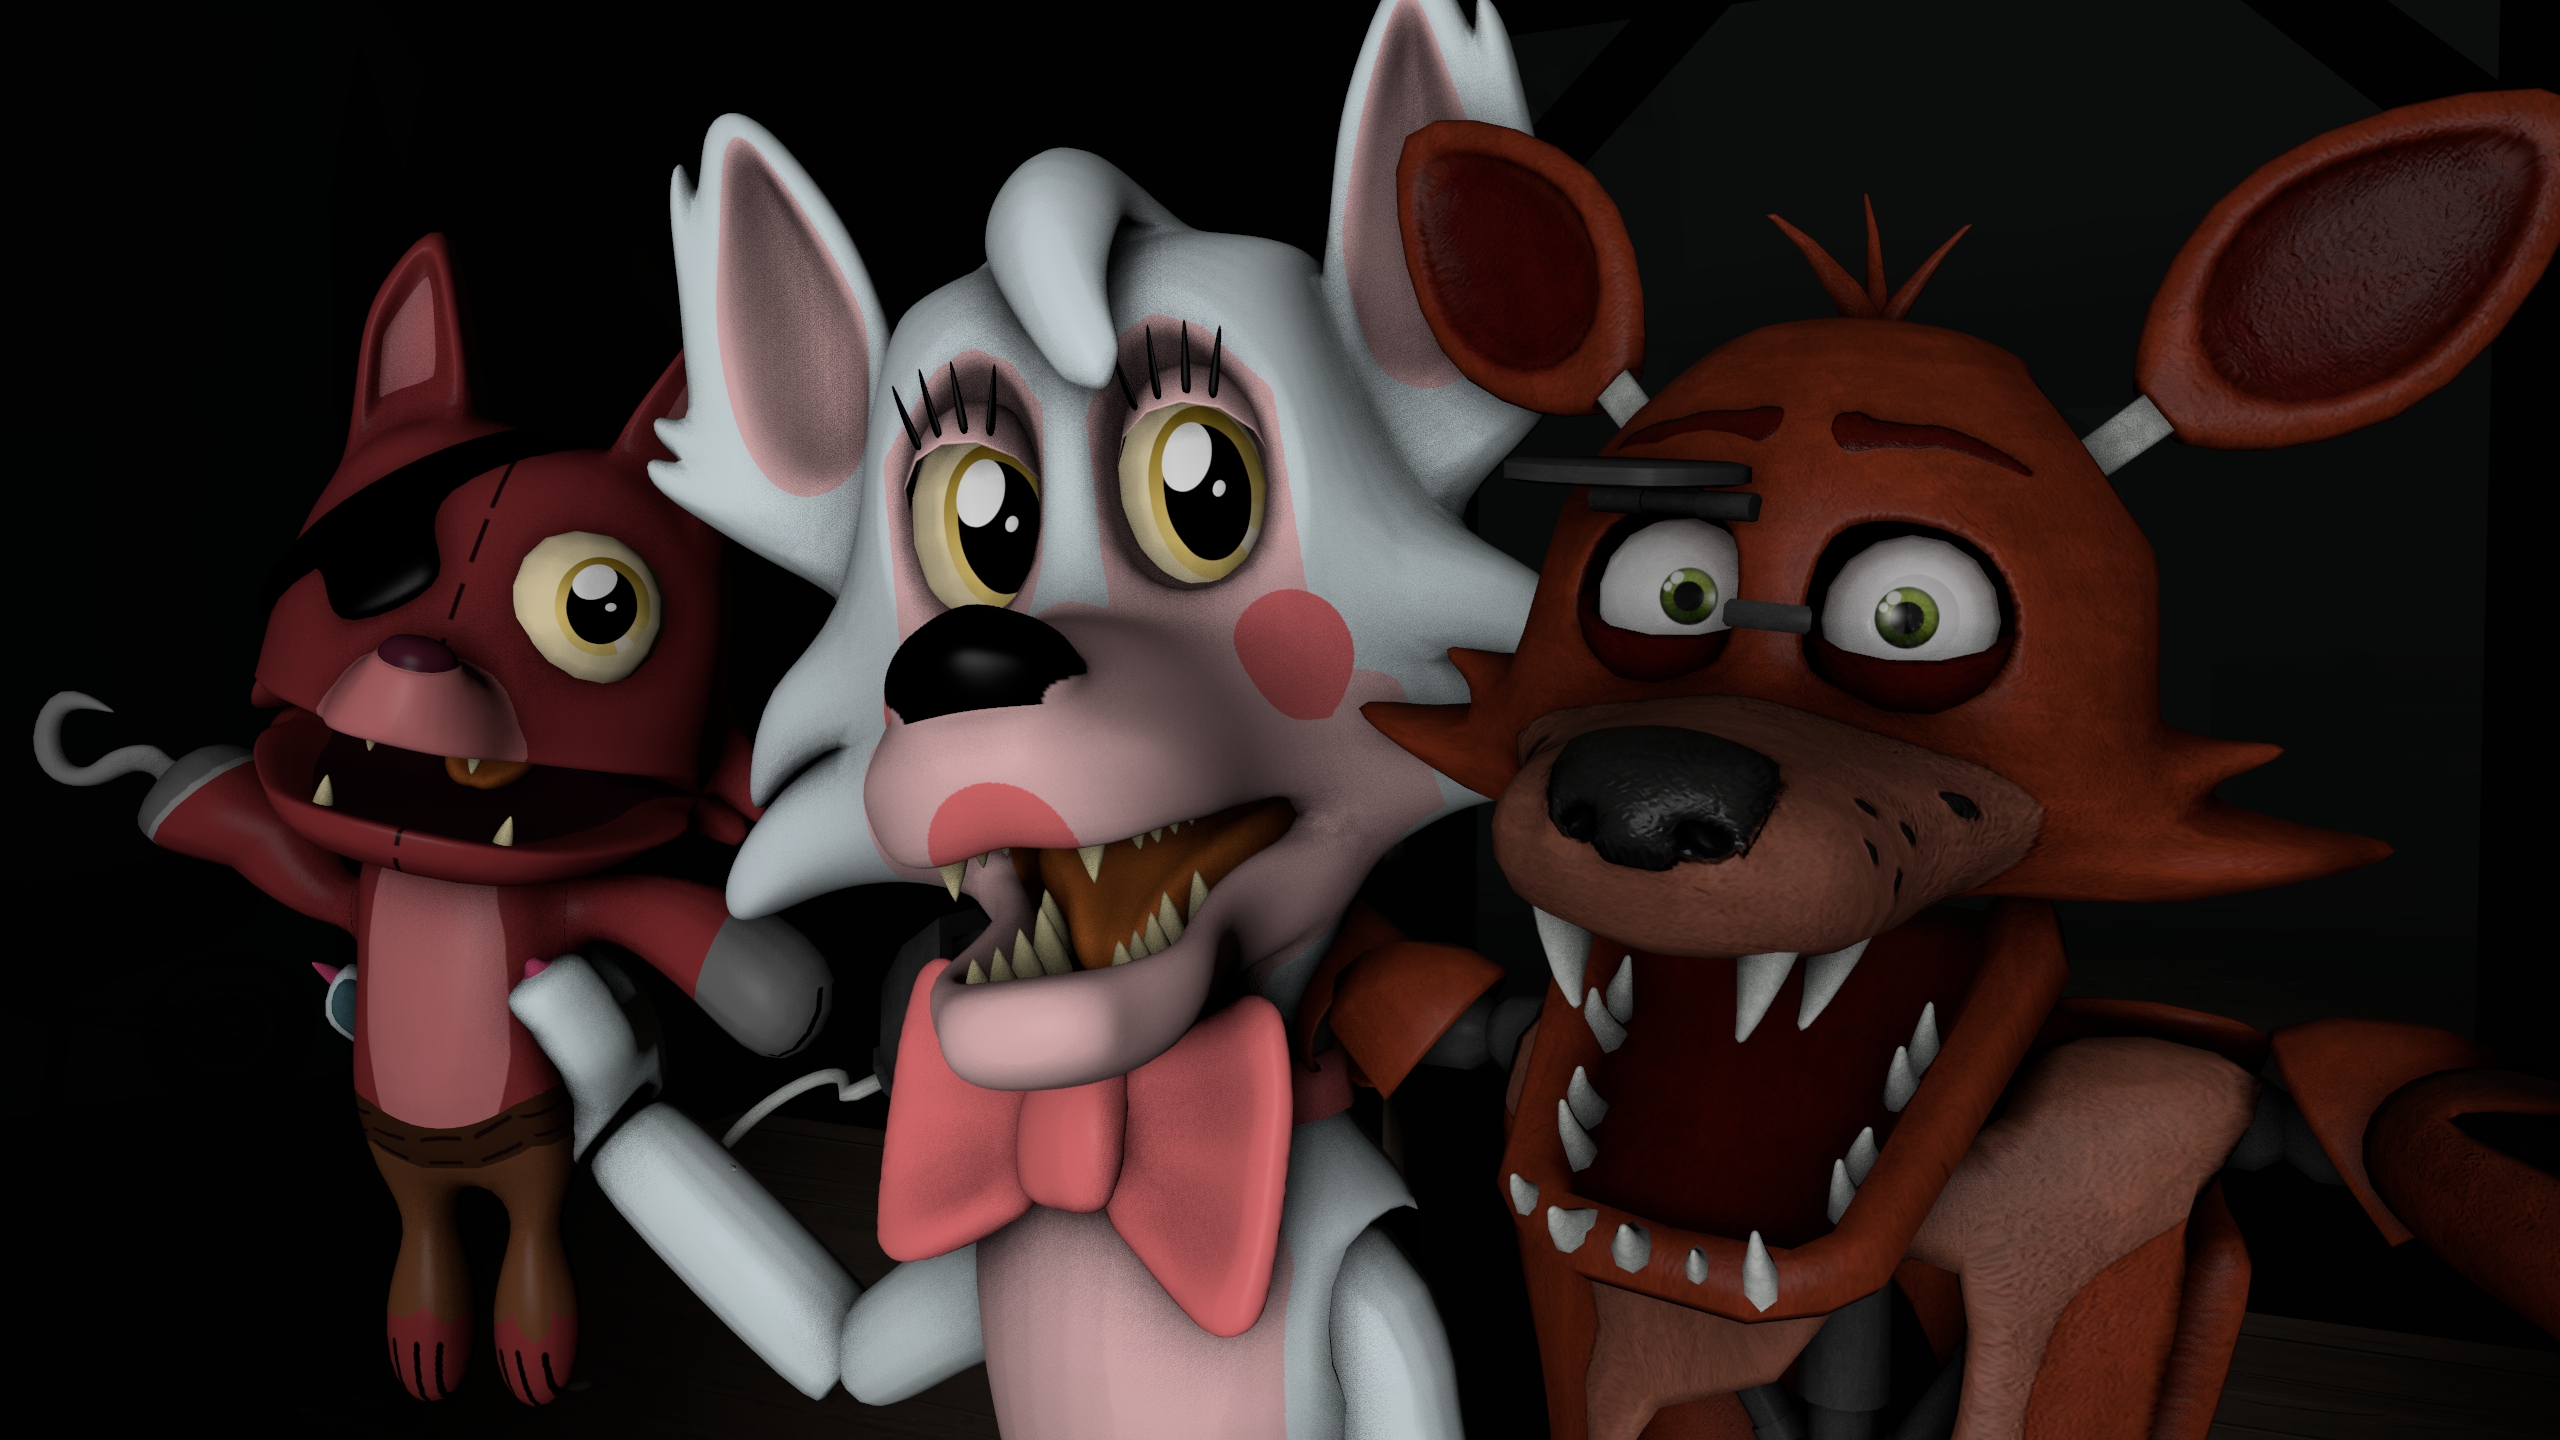 Sfm Fnaf Selfie With Foxy And Mangle By Antihacking5000